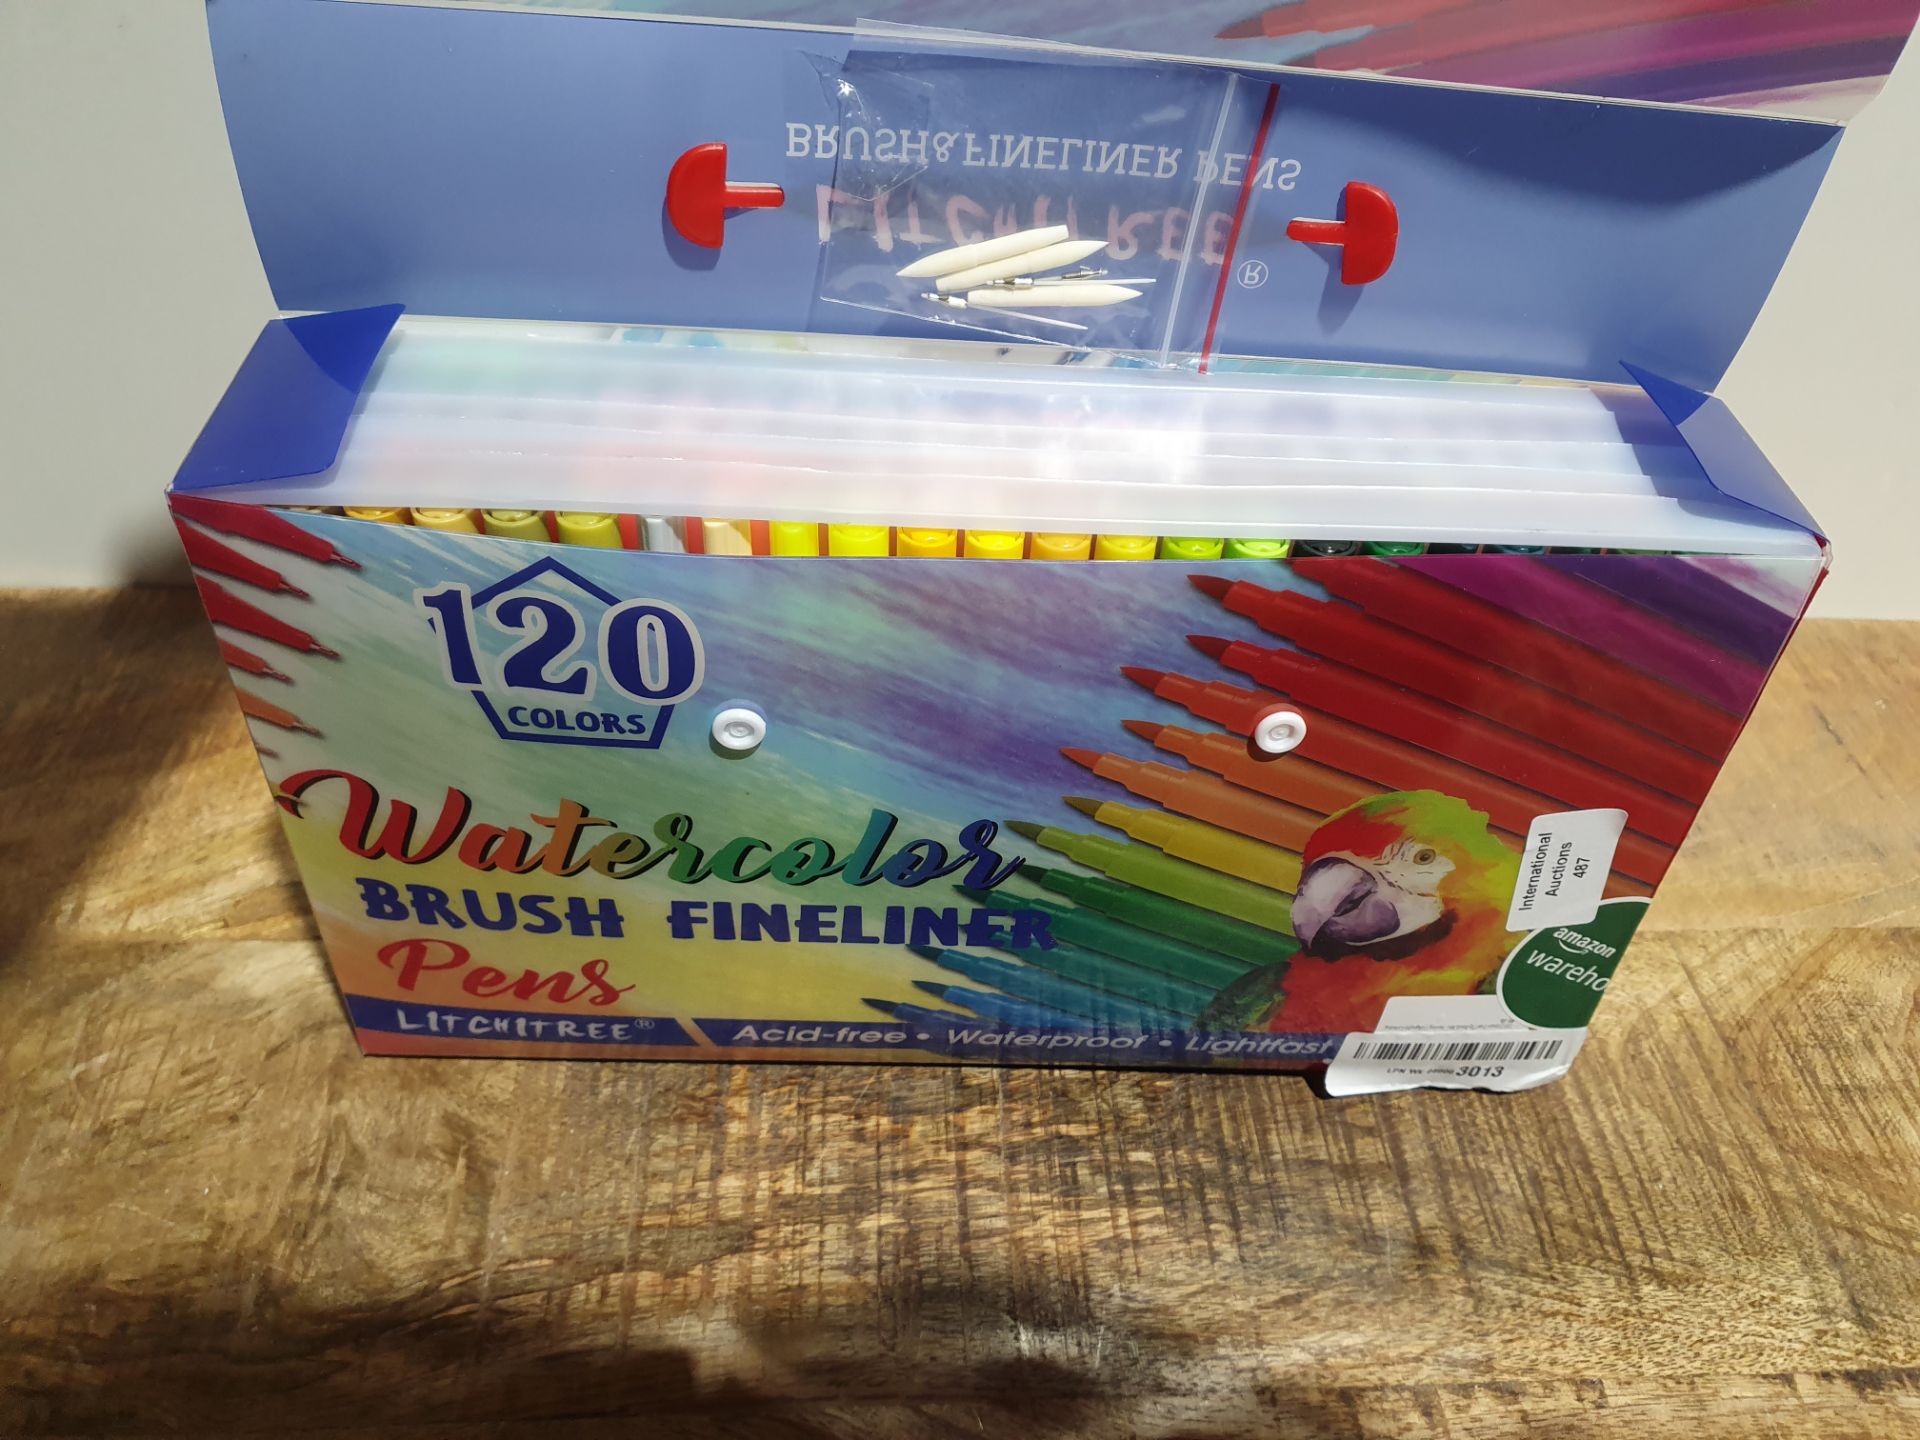 WATERCOLOUR BURSH FINELINERS PENS RRP £30Condition ReportAppraisal Available on Request - All